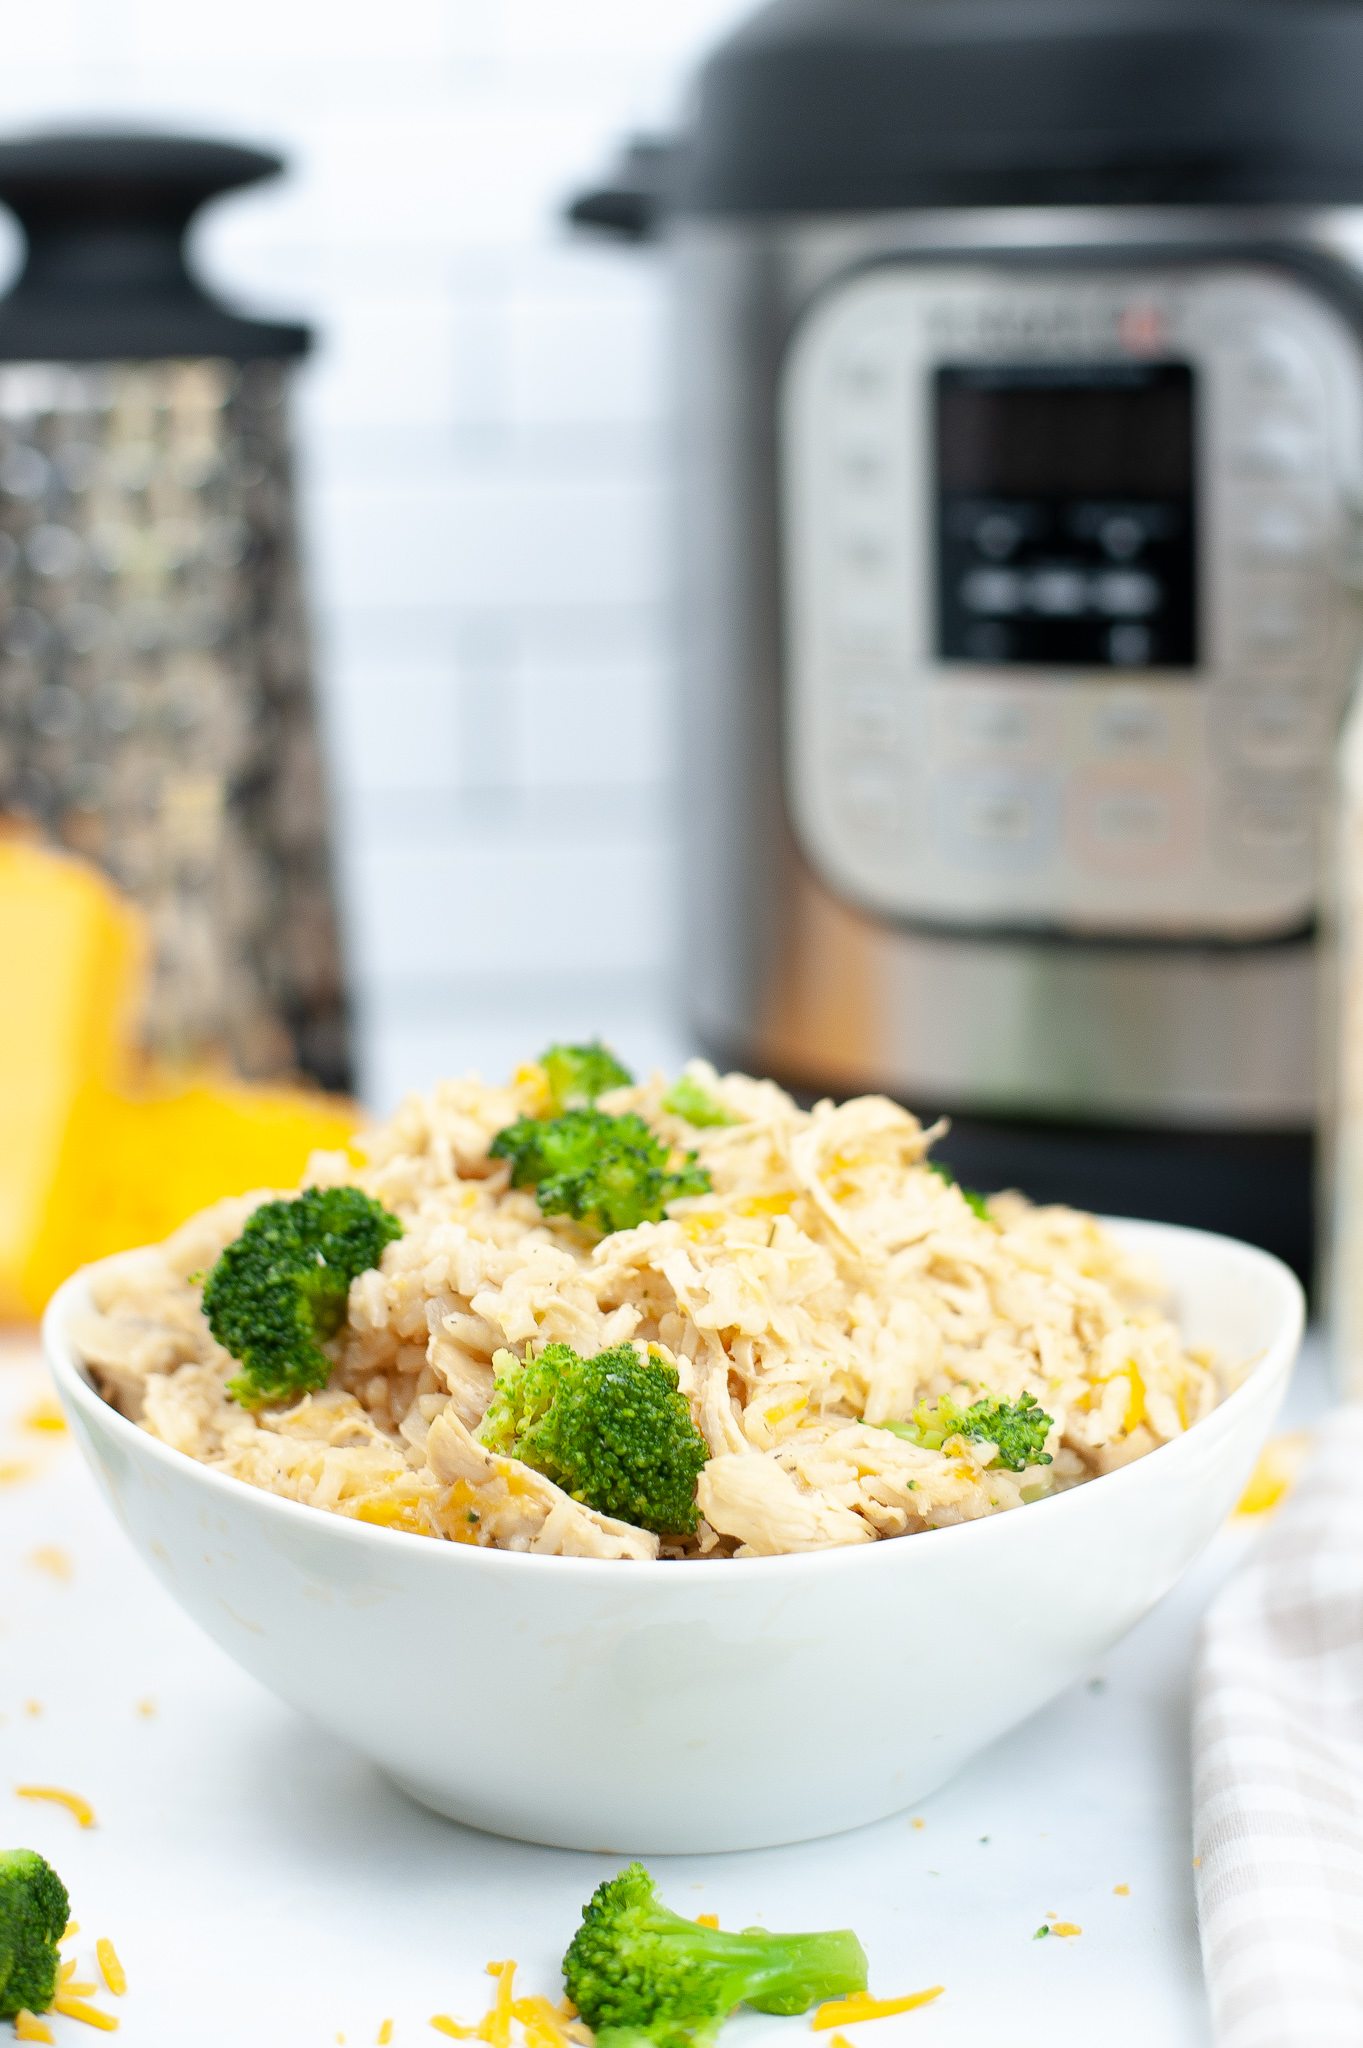 Chicken and Broccoli Casserole with Instant Pot in the background.